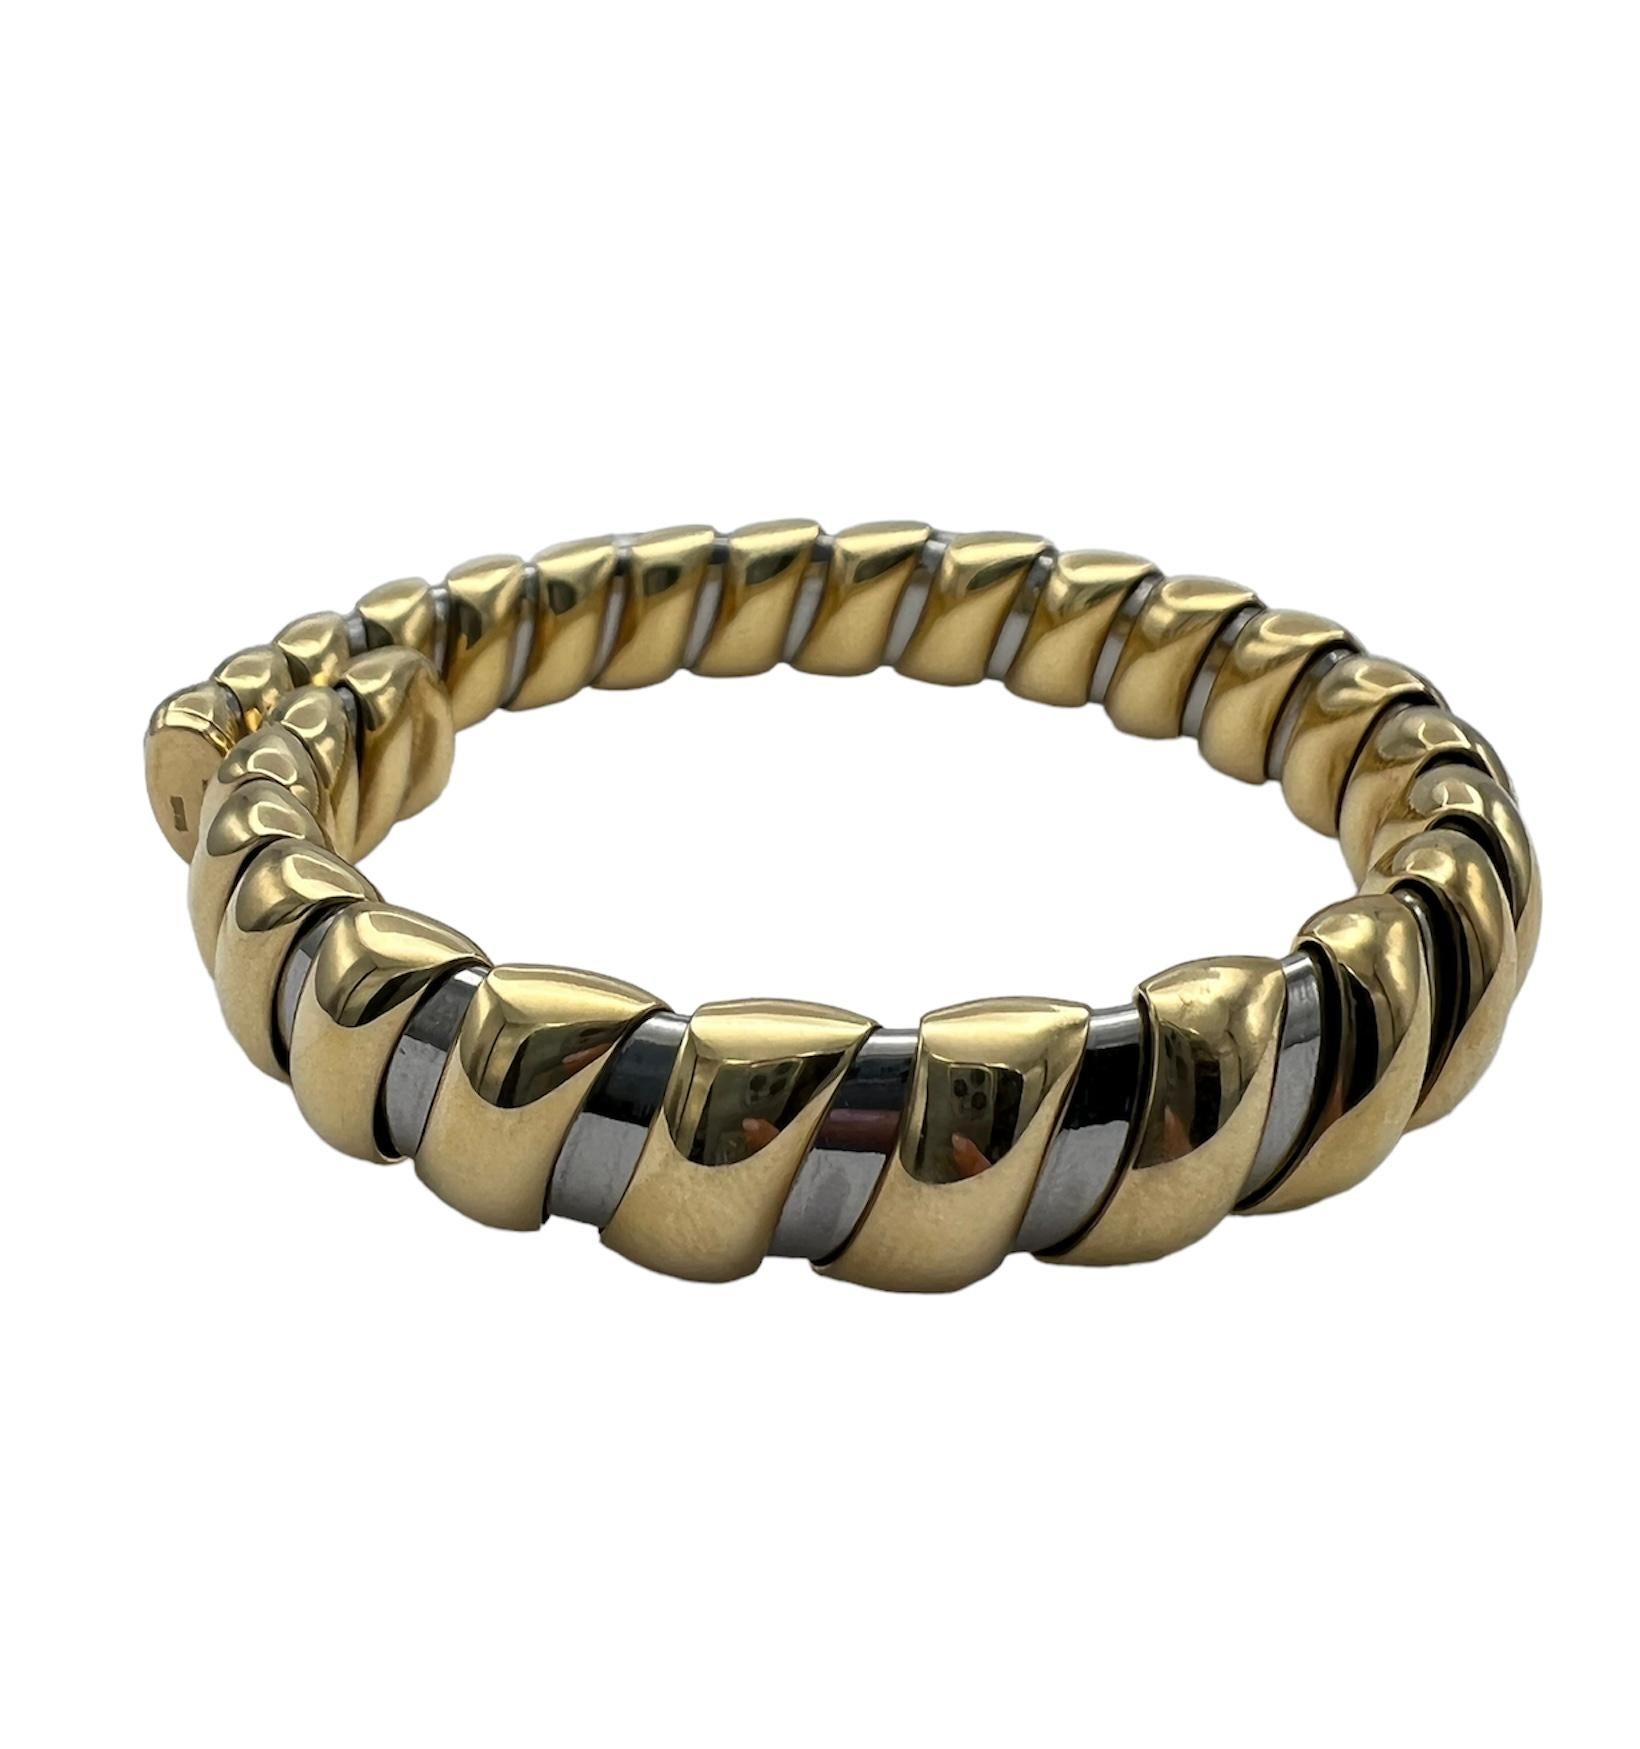 DESIGNER: Bulgari
CIRCA: 1980’s
MATERIALS: 18K Yellow Gold & Stainless Steel
WEIGHT: 52.8 grams
MEASUREMENTS: 7” x 3/8”
HALLMARKS: BVLGARI, 750
ITEM DETAILS:
A Bulgari stainless steel and 18k gold bangle bracelet.

The iconic Tubogas design is